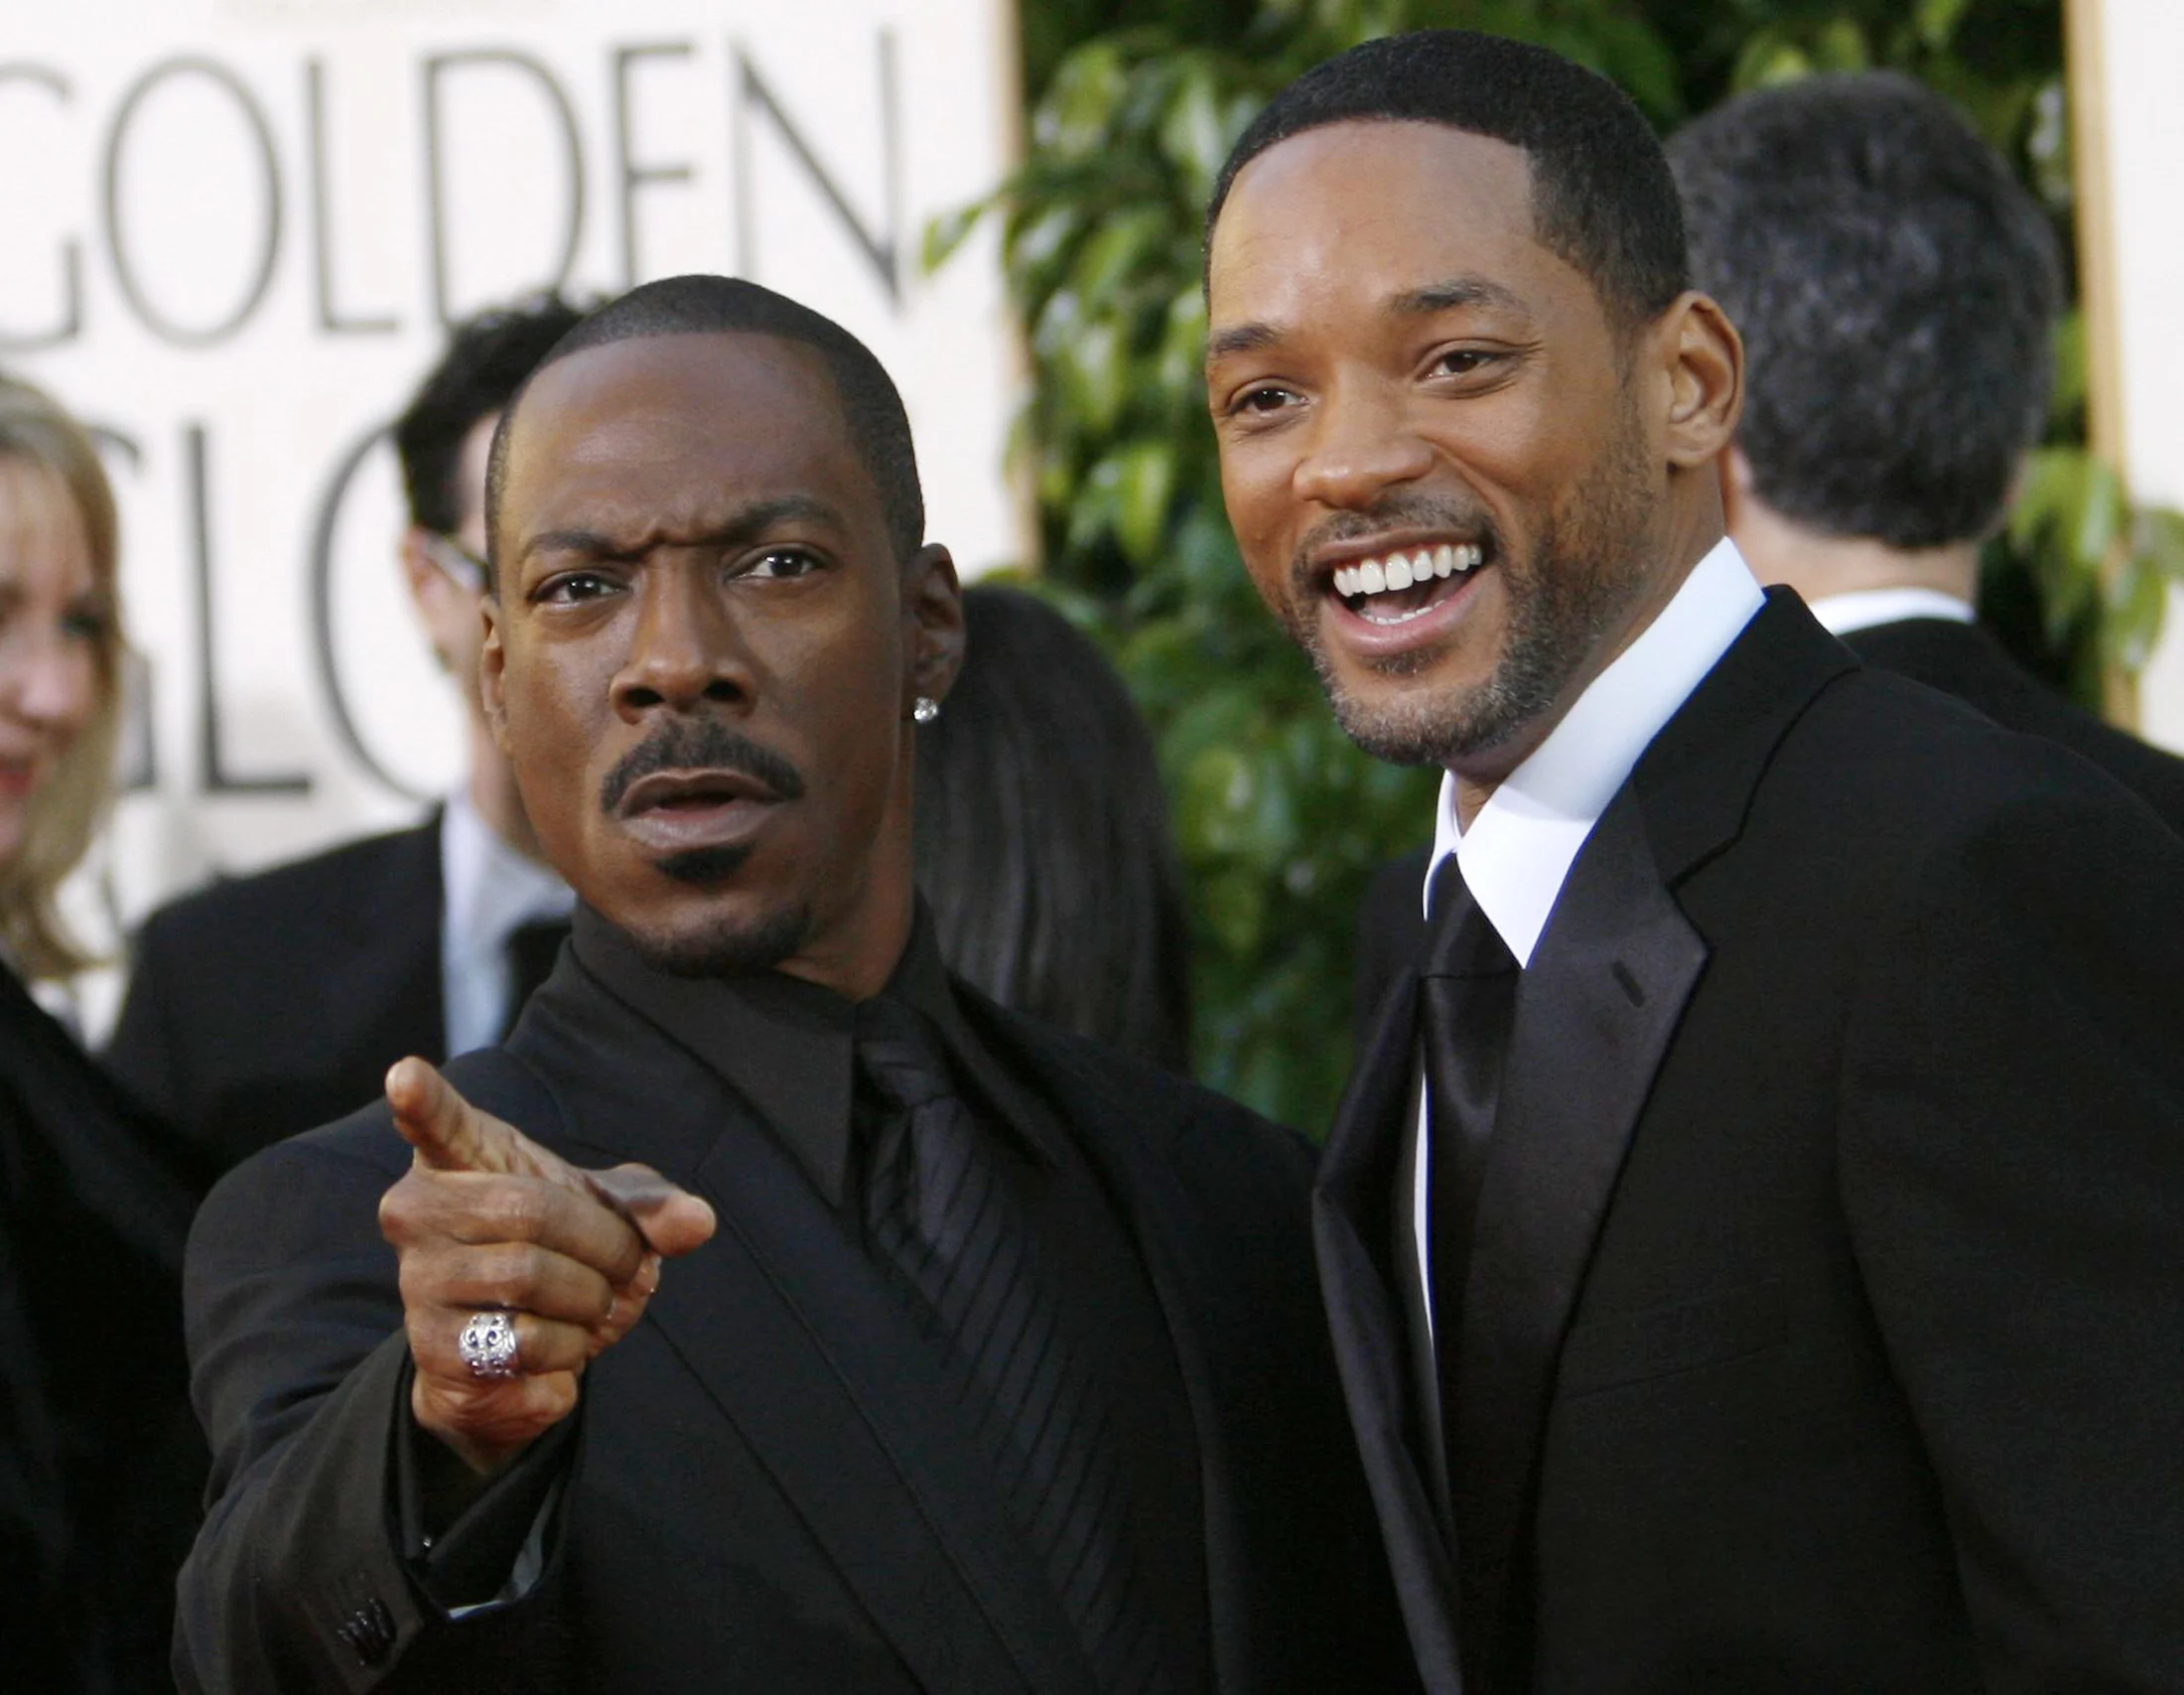 Eddie Murphy And Will Smith Arrive At The 64th Annual Golden Globe Awards In Beverly Hills